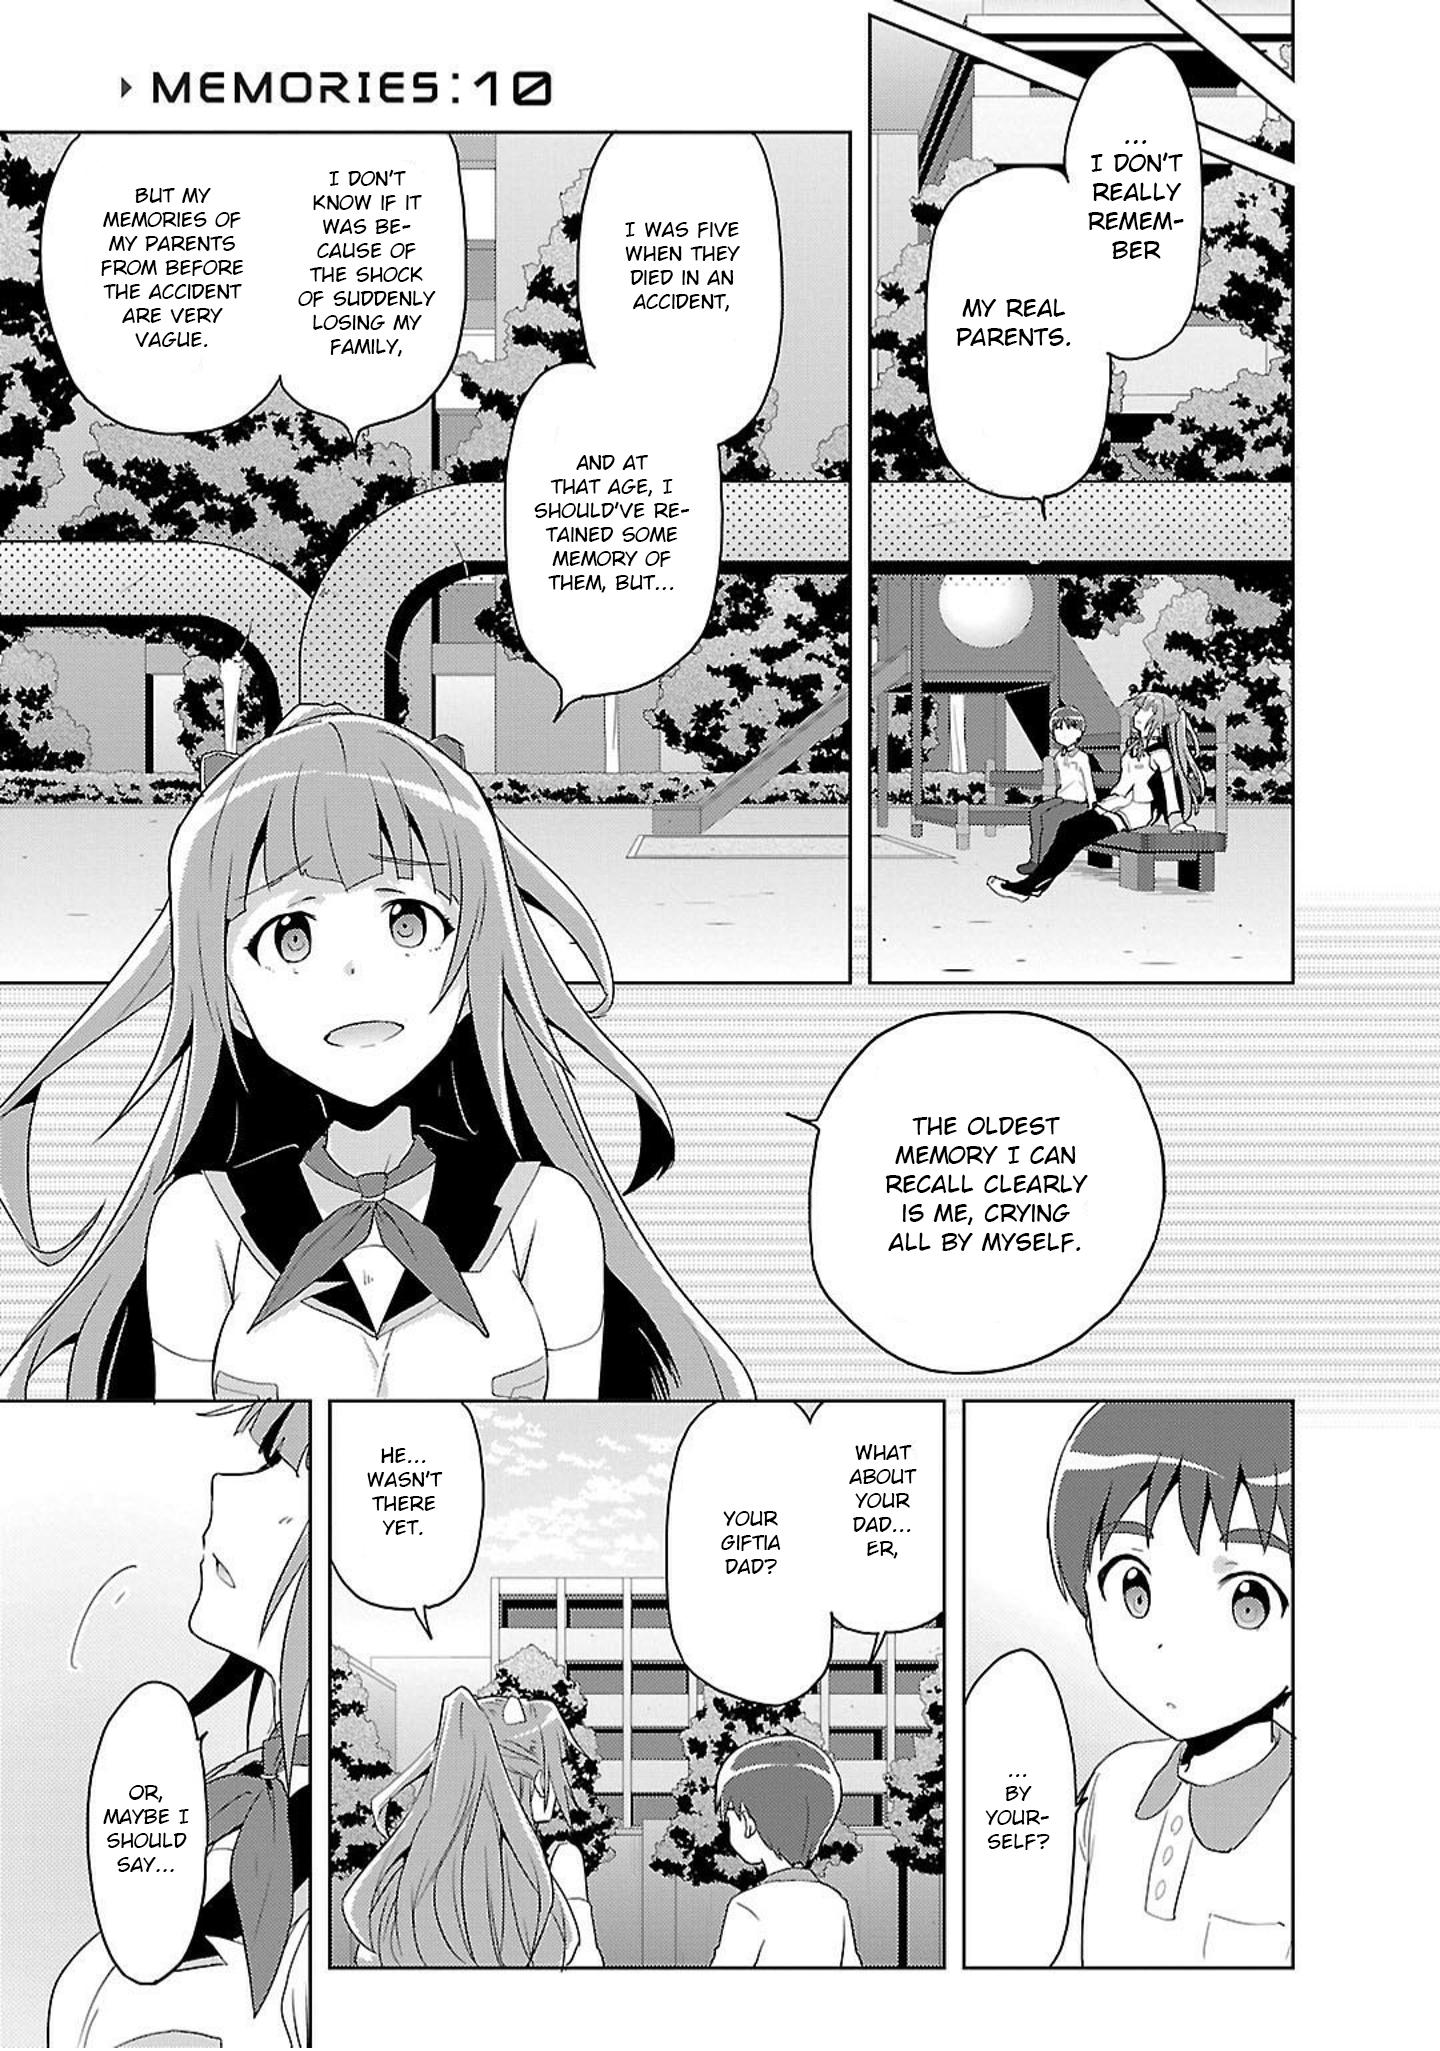 Plastic Memories Say To Good Bye Chapter 10 Read Plastic Memories Say To Good Bye Chapter 10 Online At Allmanga Us Page 1